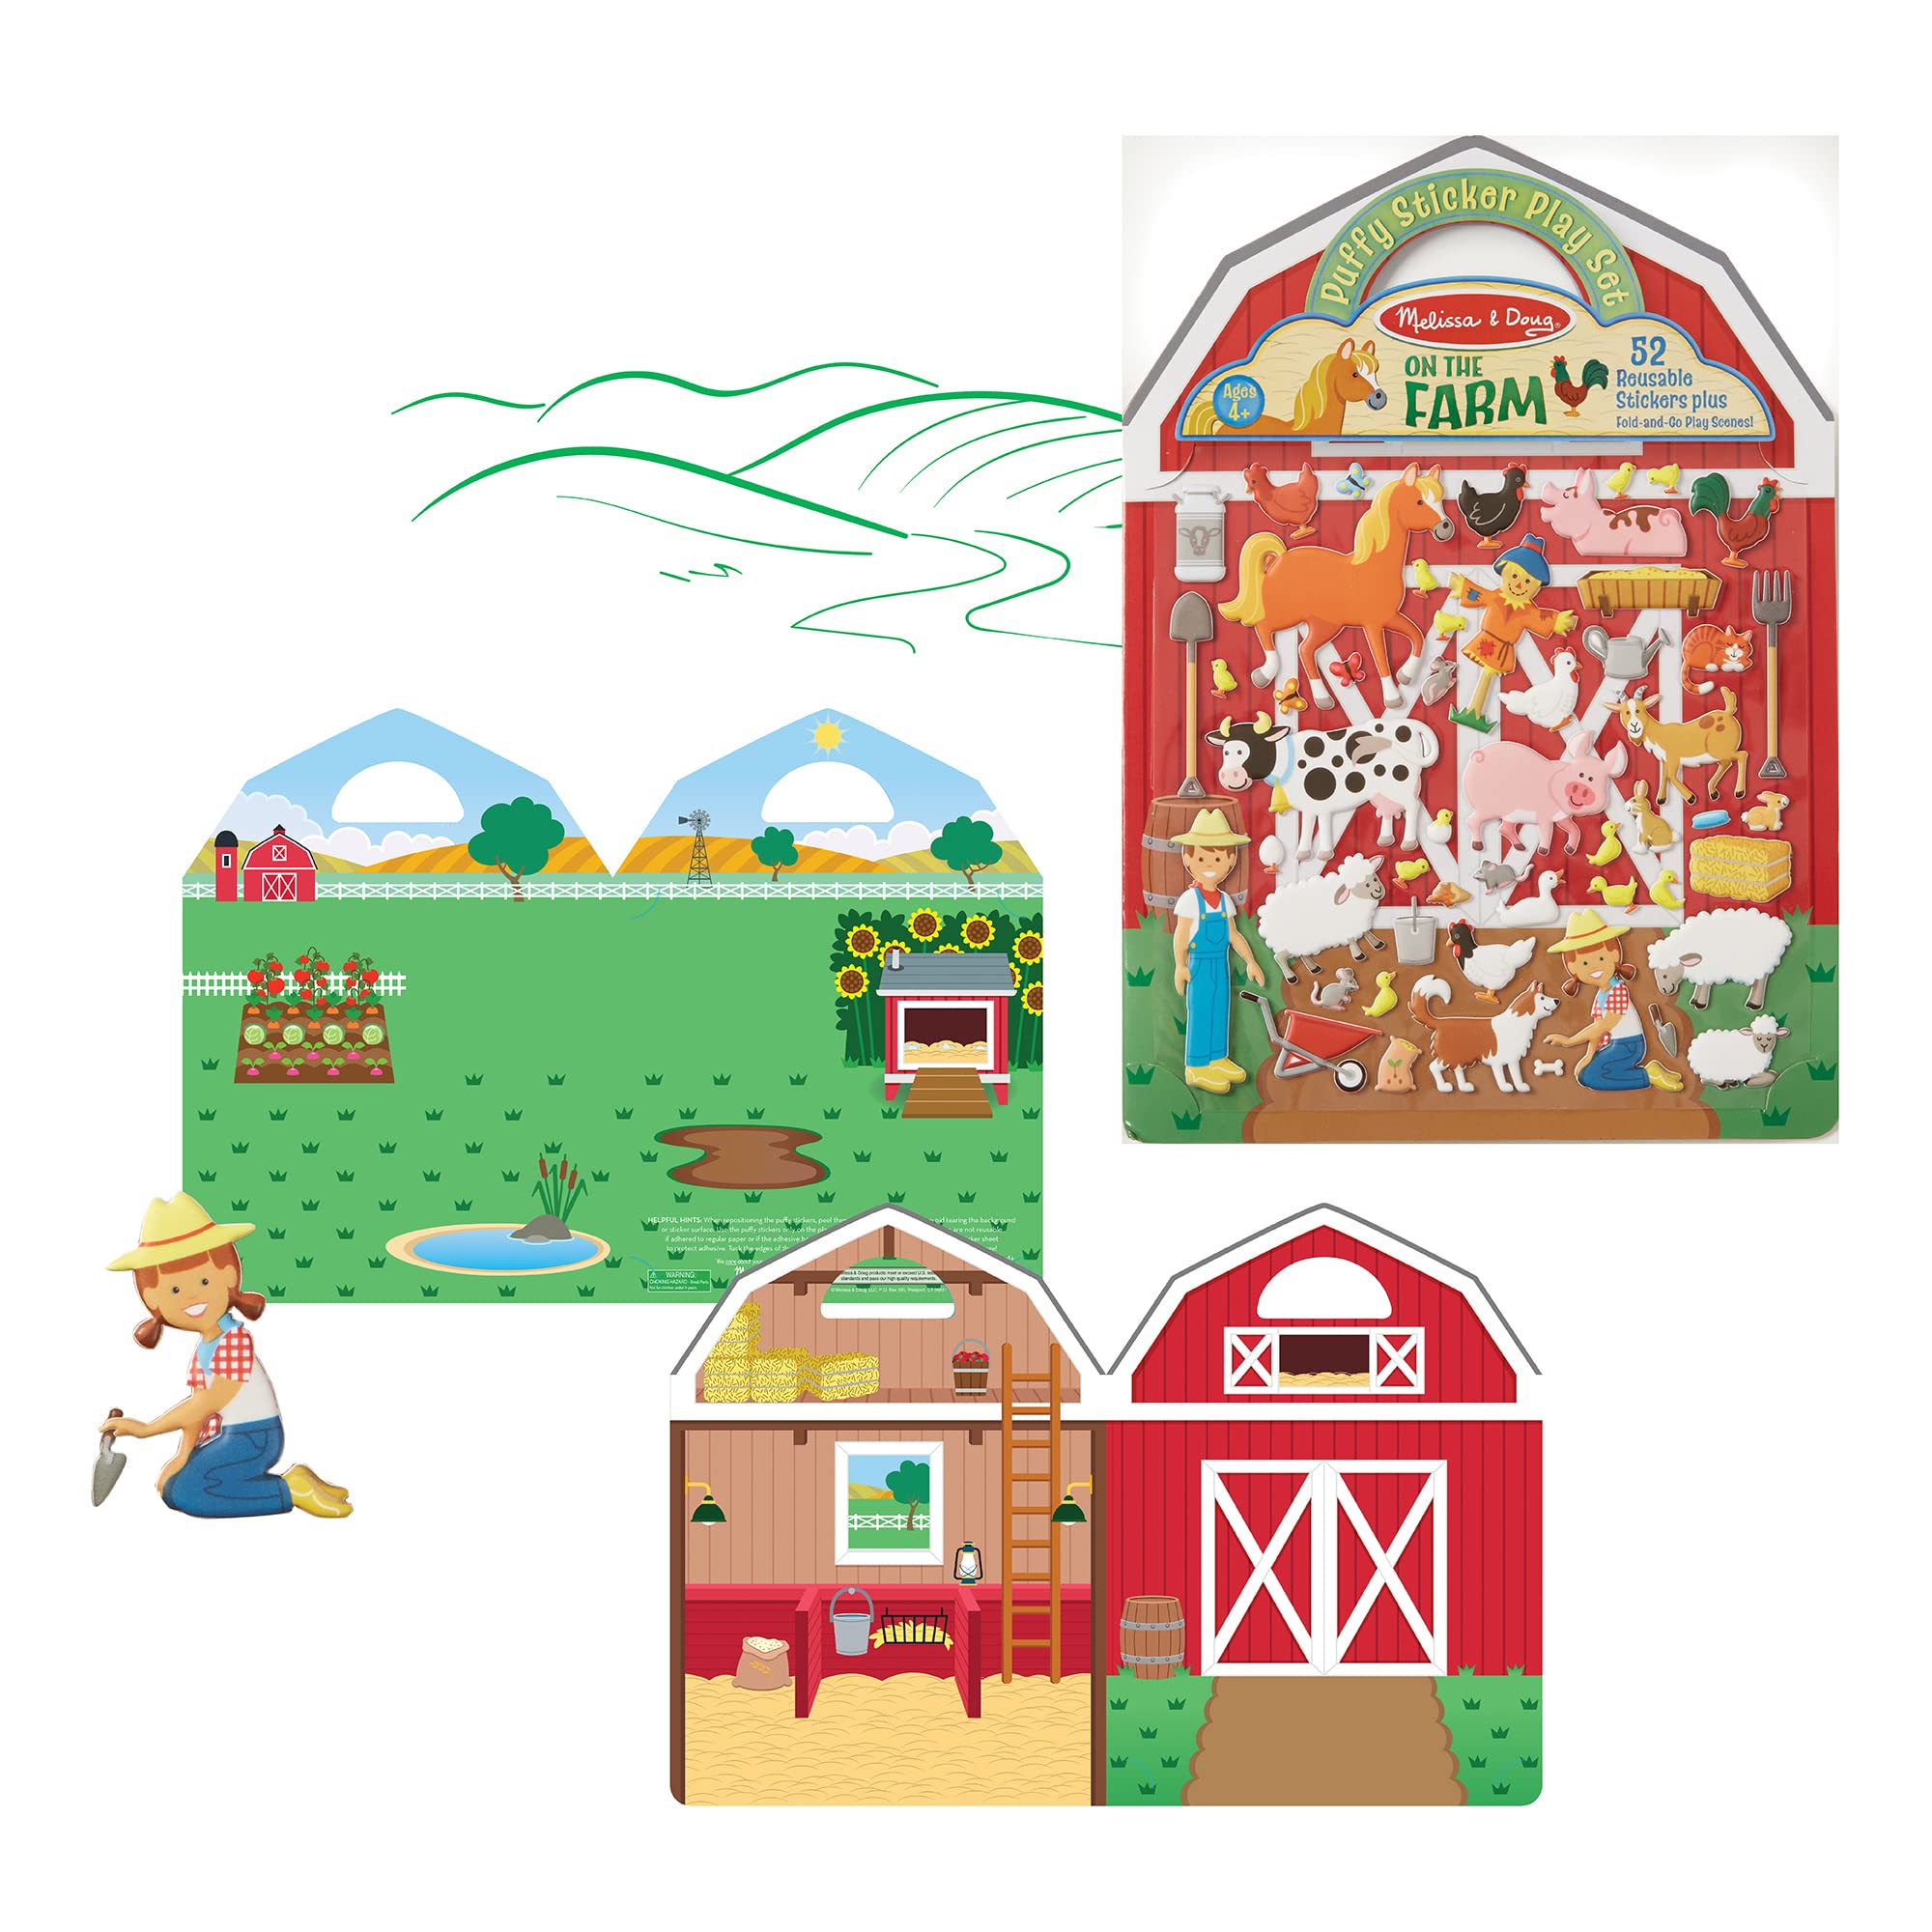 Melissa & Doug Puffy Sticker Play Set - On the Farm - 52 Reusable Stickers, 2 Fold-Out Scenes - Restickable Farm Sticker Book, Puffy Farm Animals Removable Stickers For Kids Ages 4+